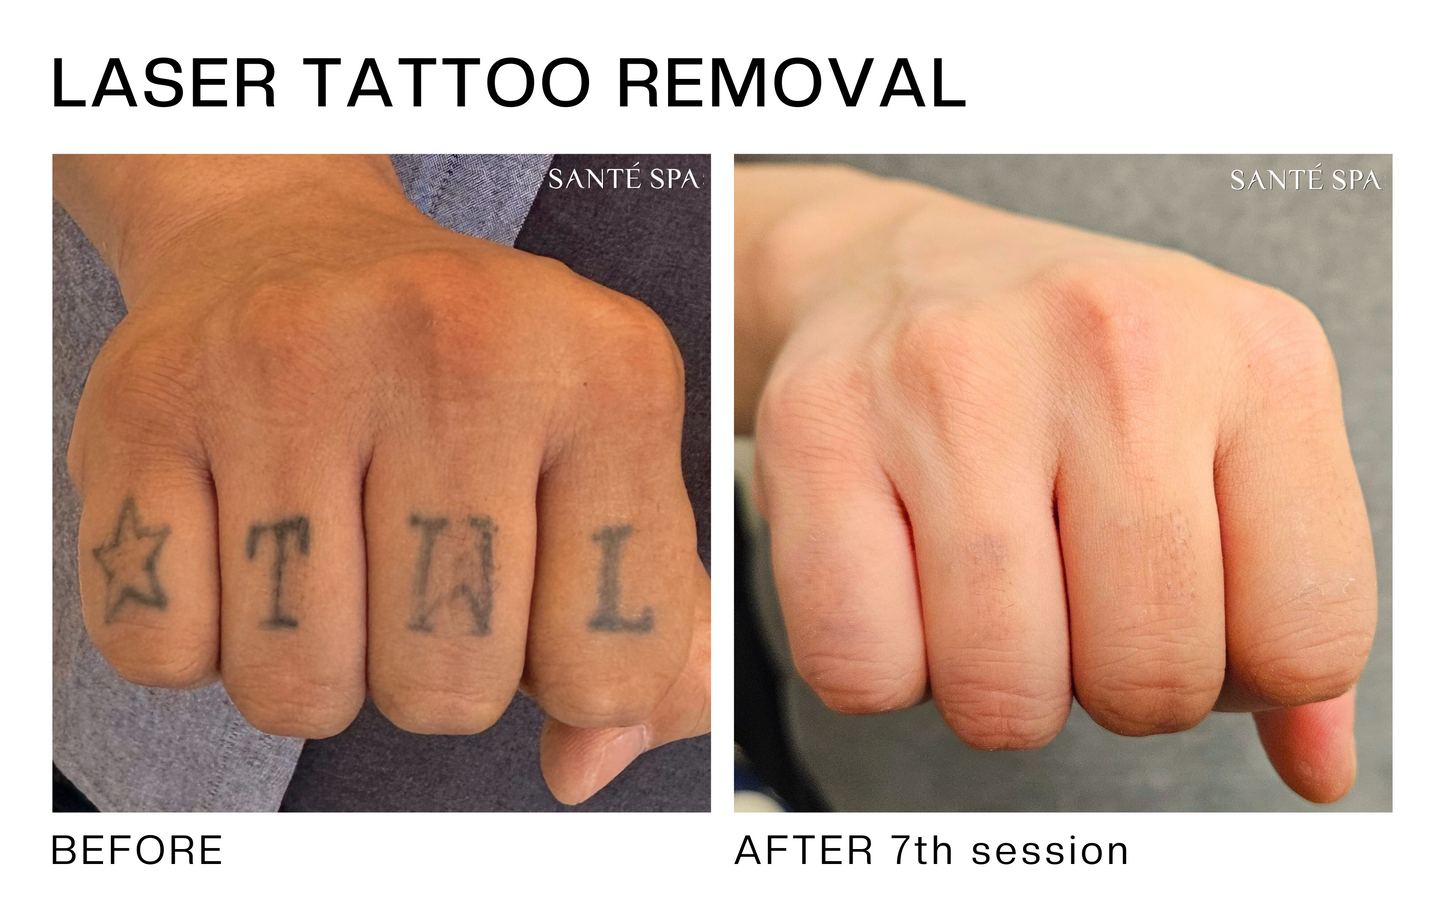 Tattoo Removal Treatments at Sante Spa in Thousand Oaks Starting at Just $48! May Purchase up to Eight Laser Treatment Sessions.